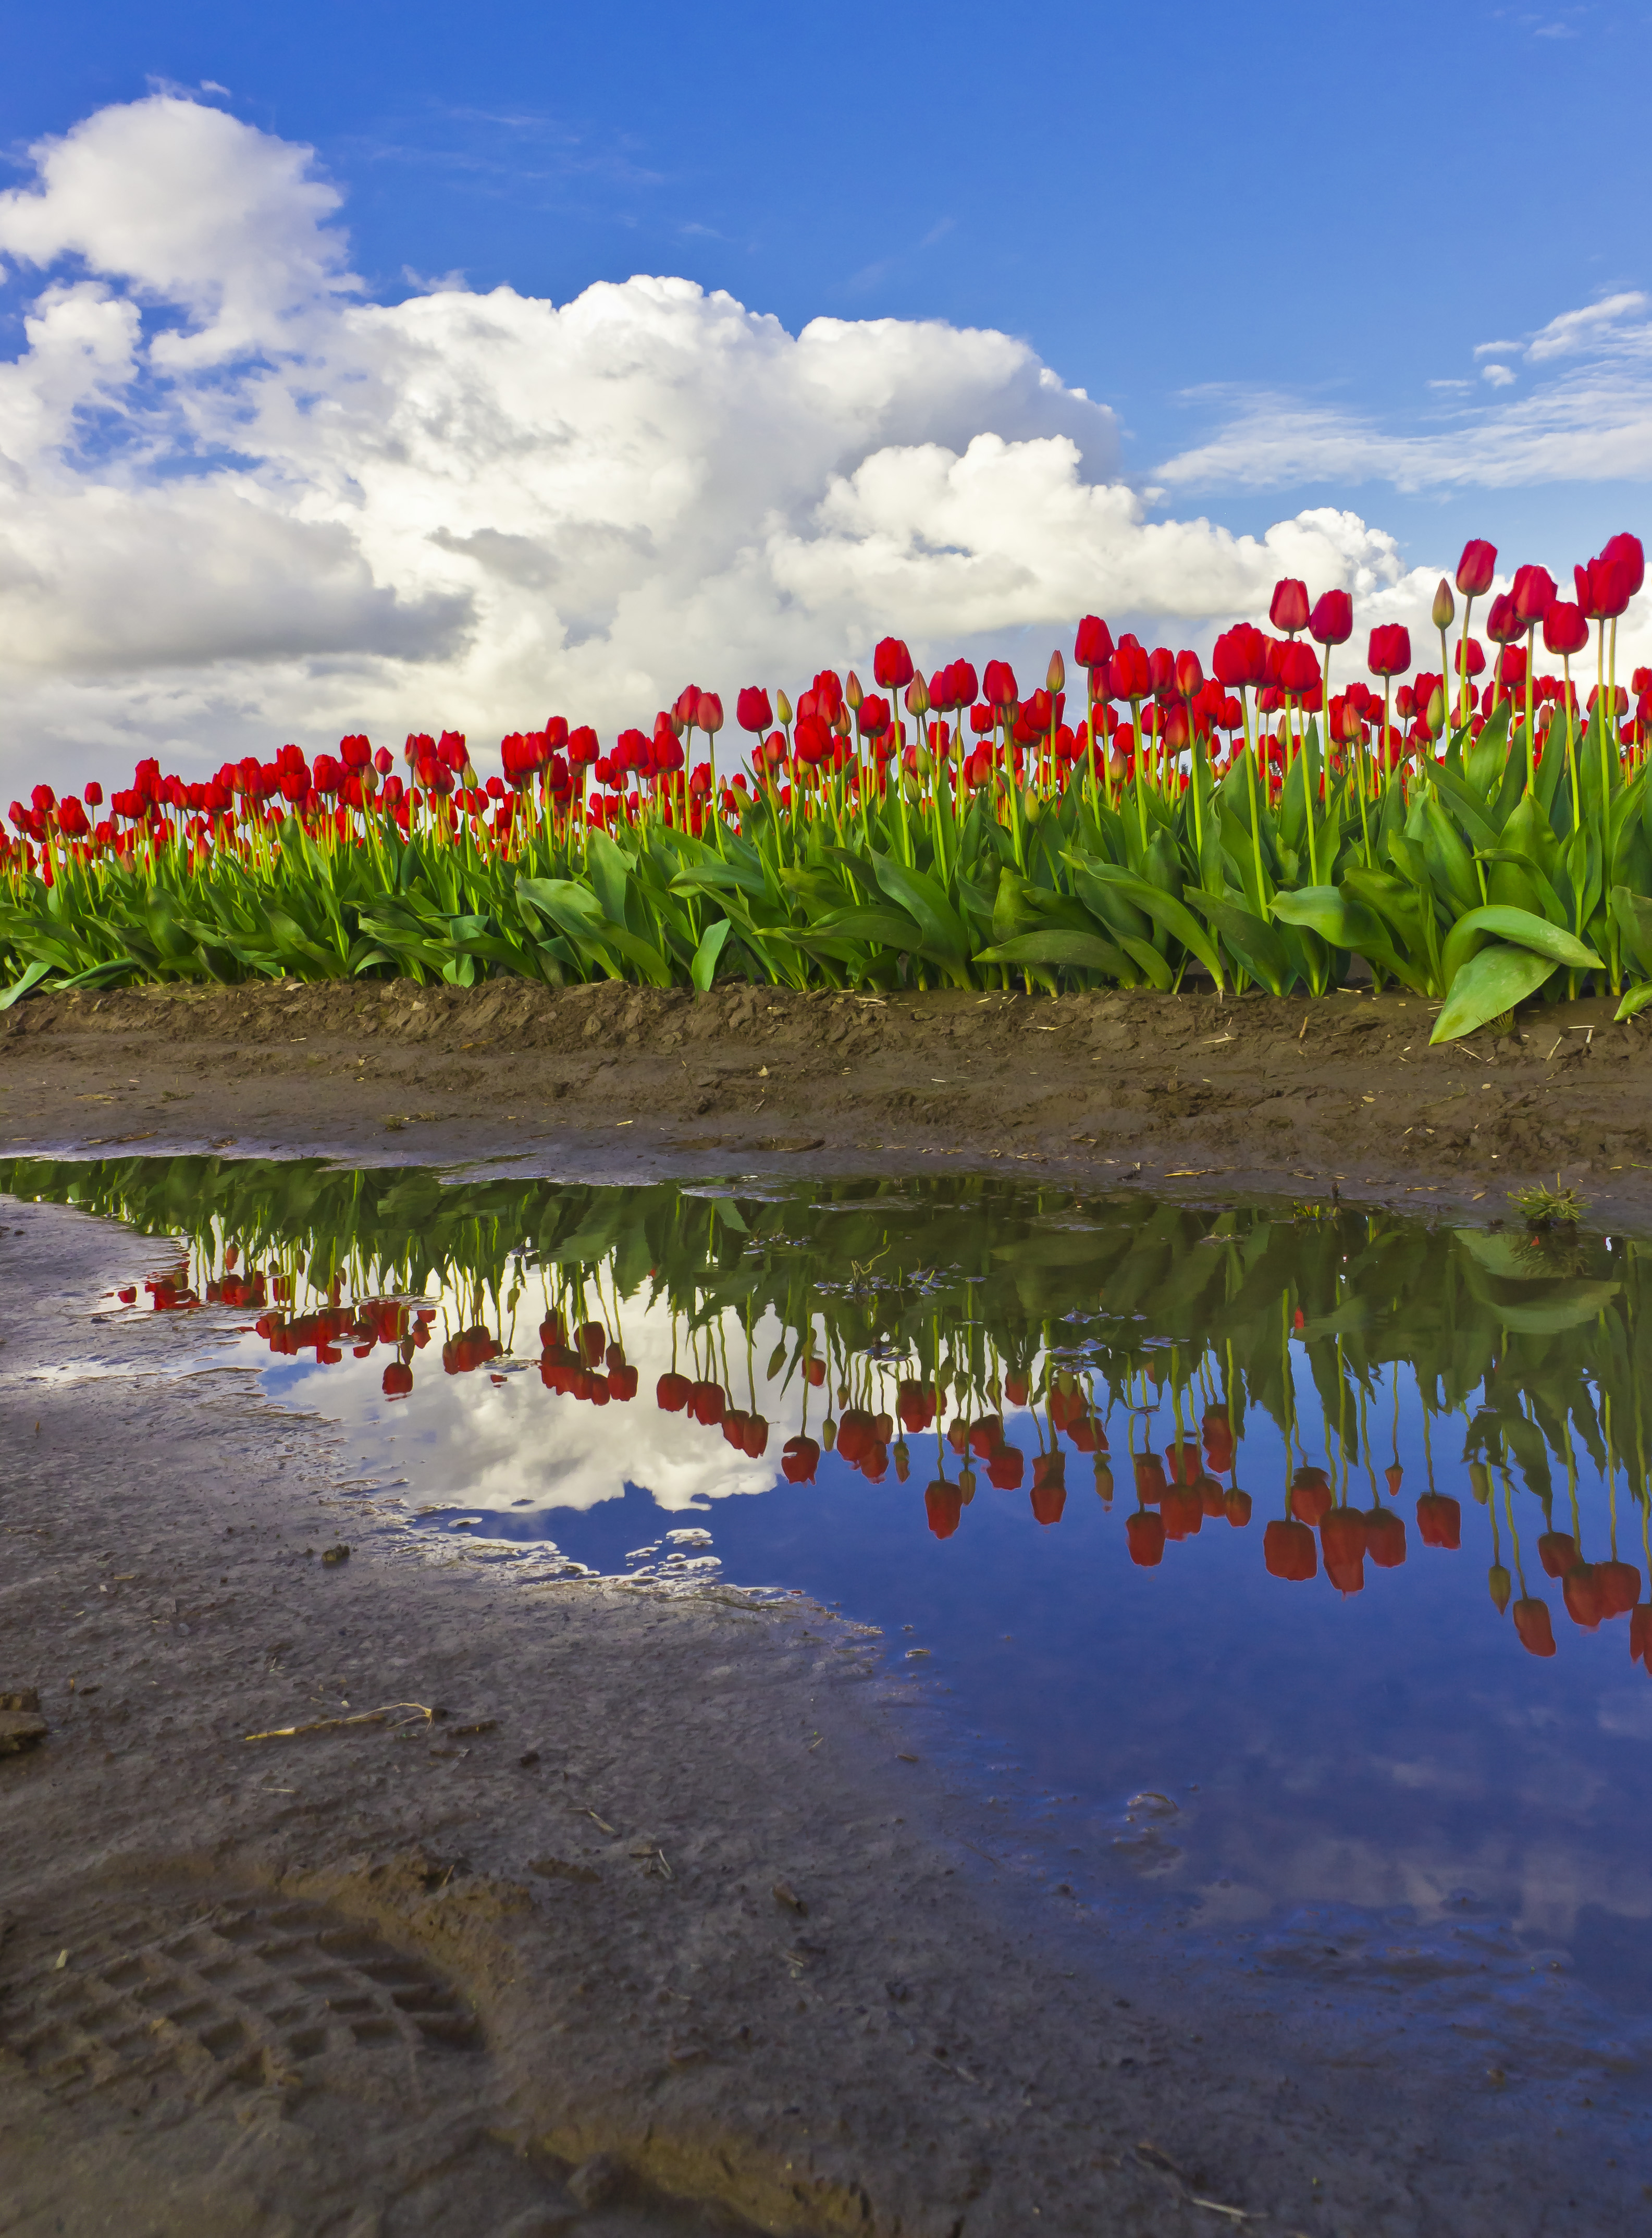 Several Tulip Festival Images… | North Western Images - photos by ...